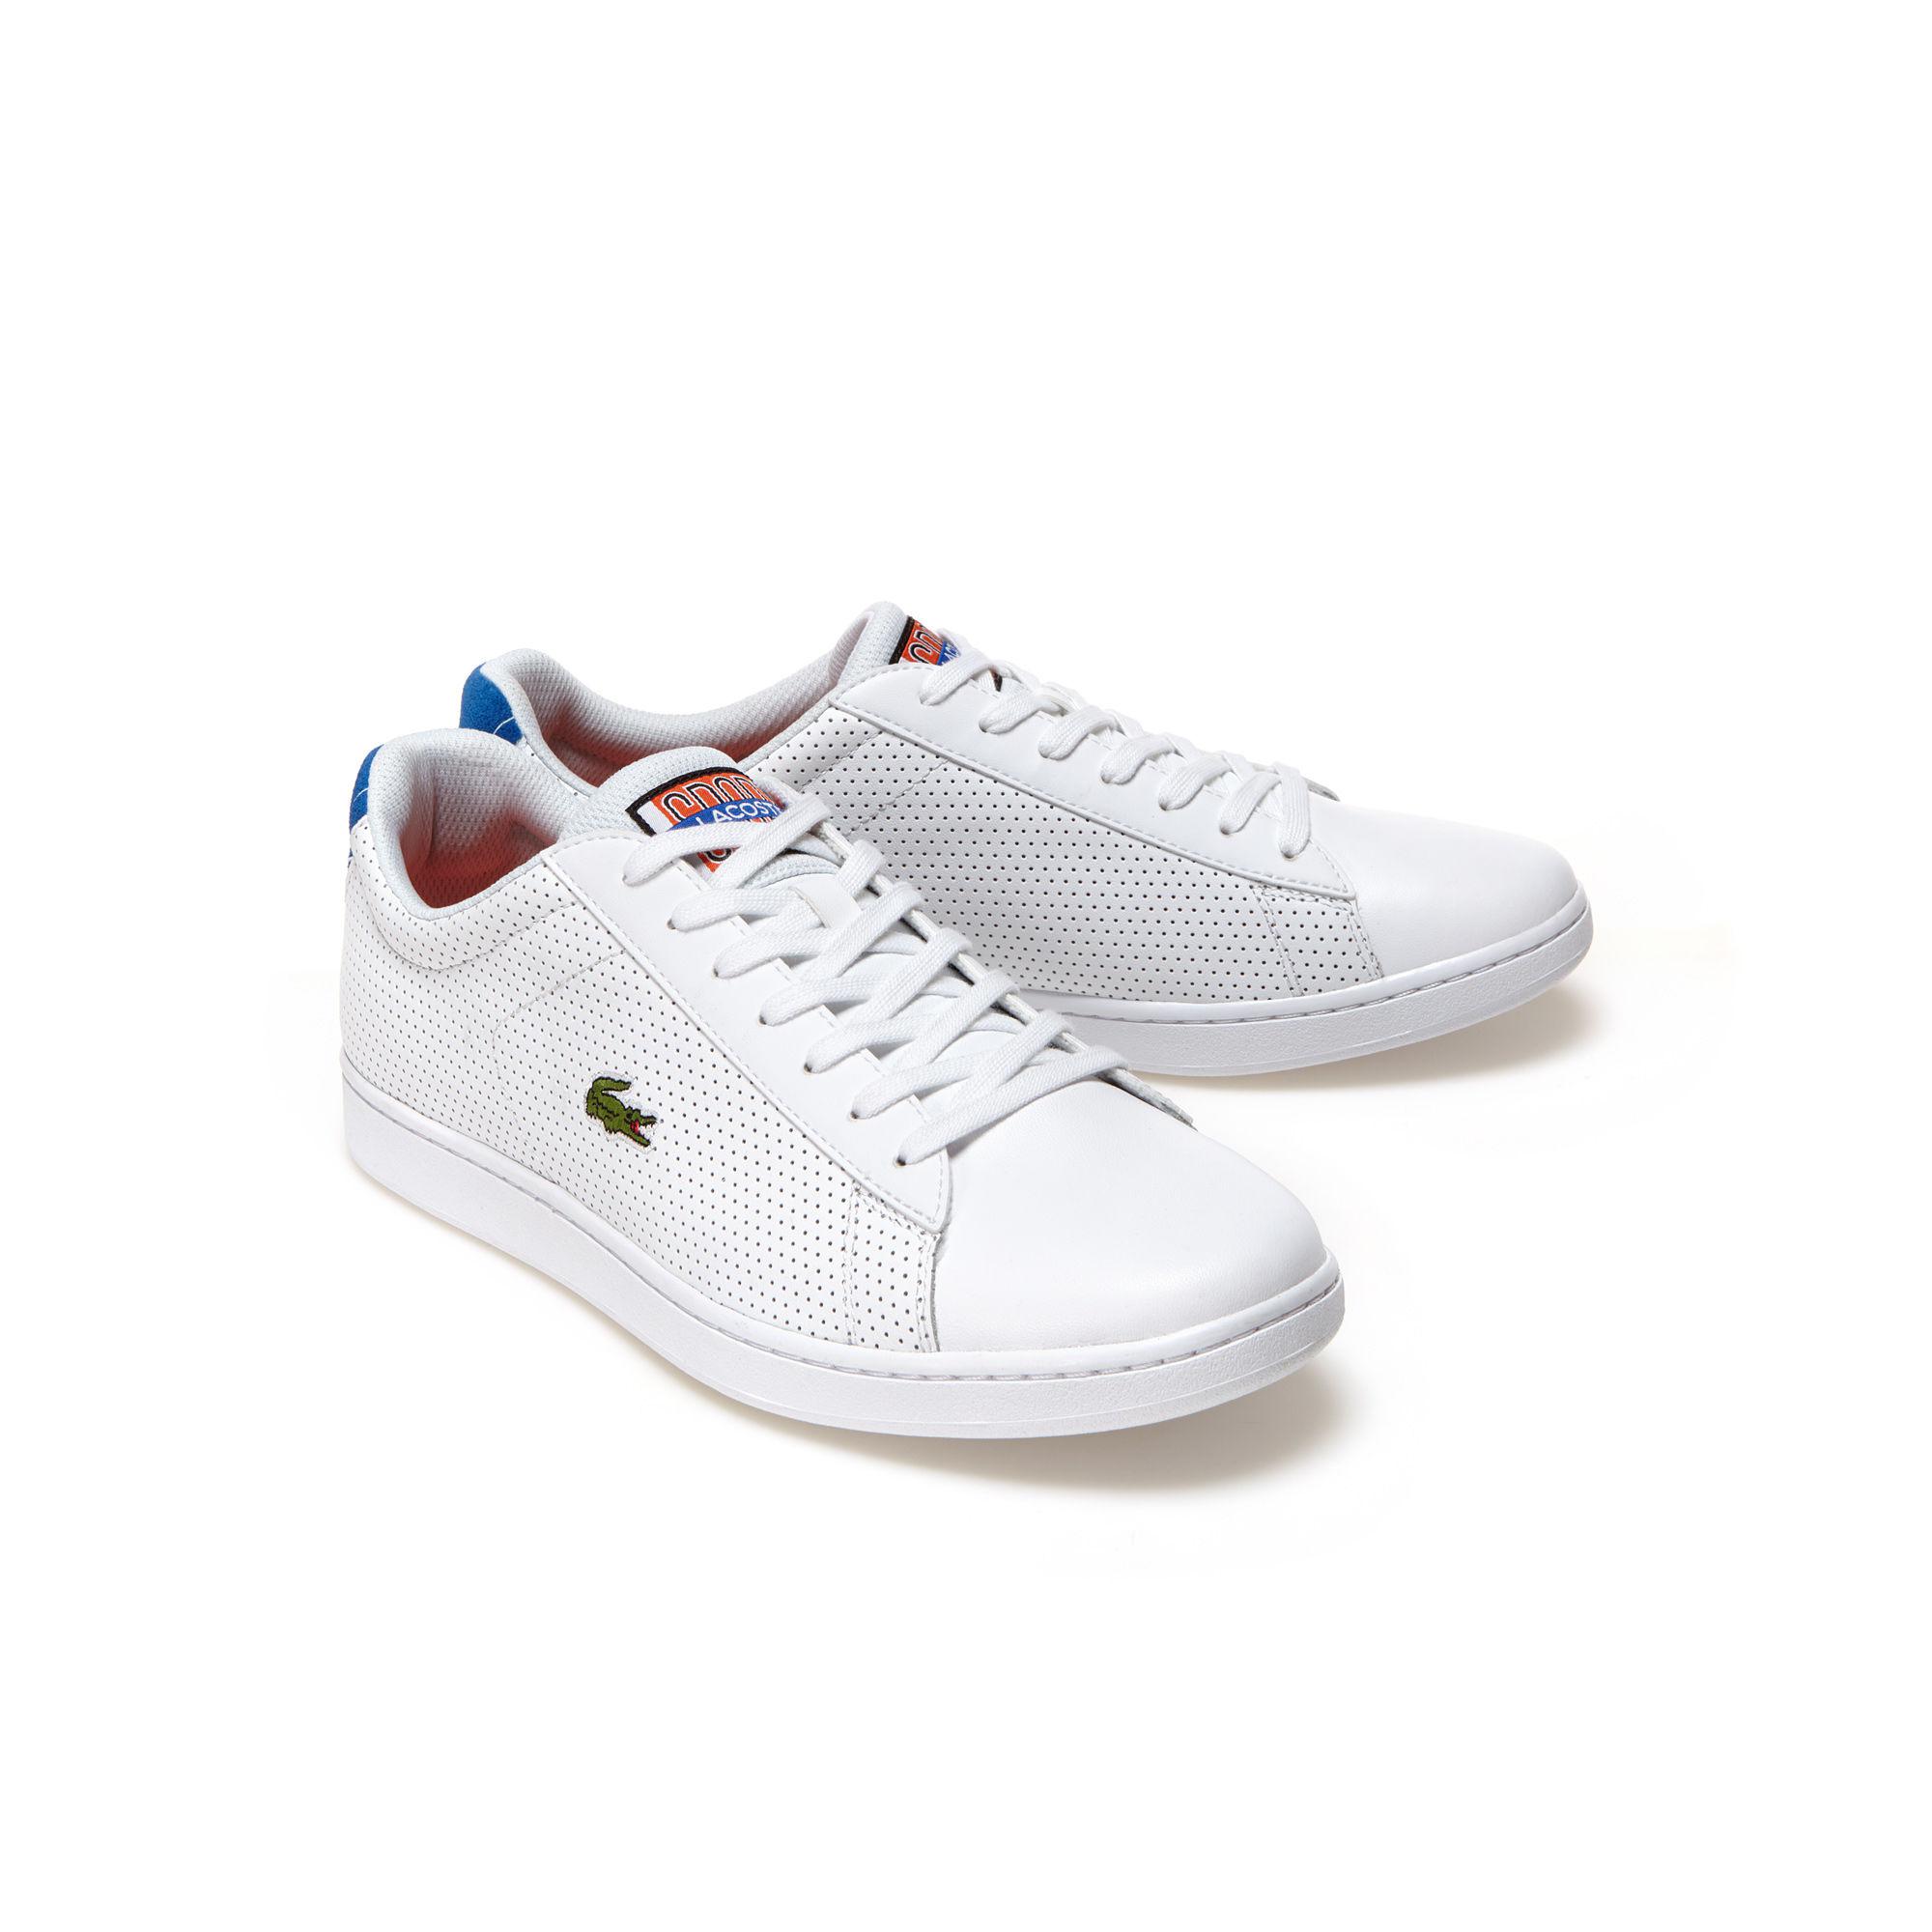 Lacoste Carnaby Evo Leather Trainers in Blue for Men - Lyst